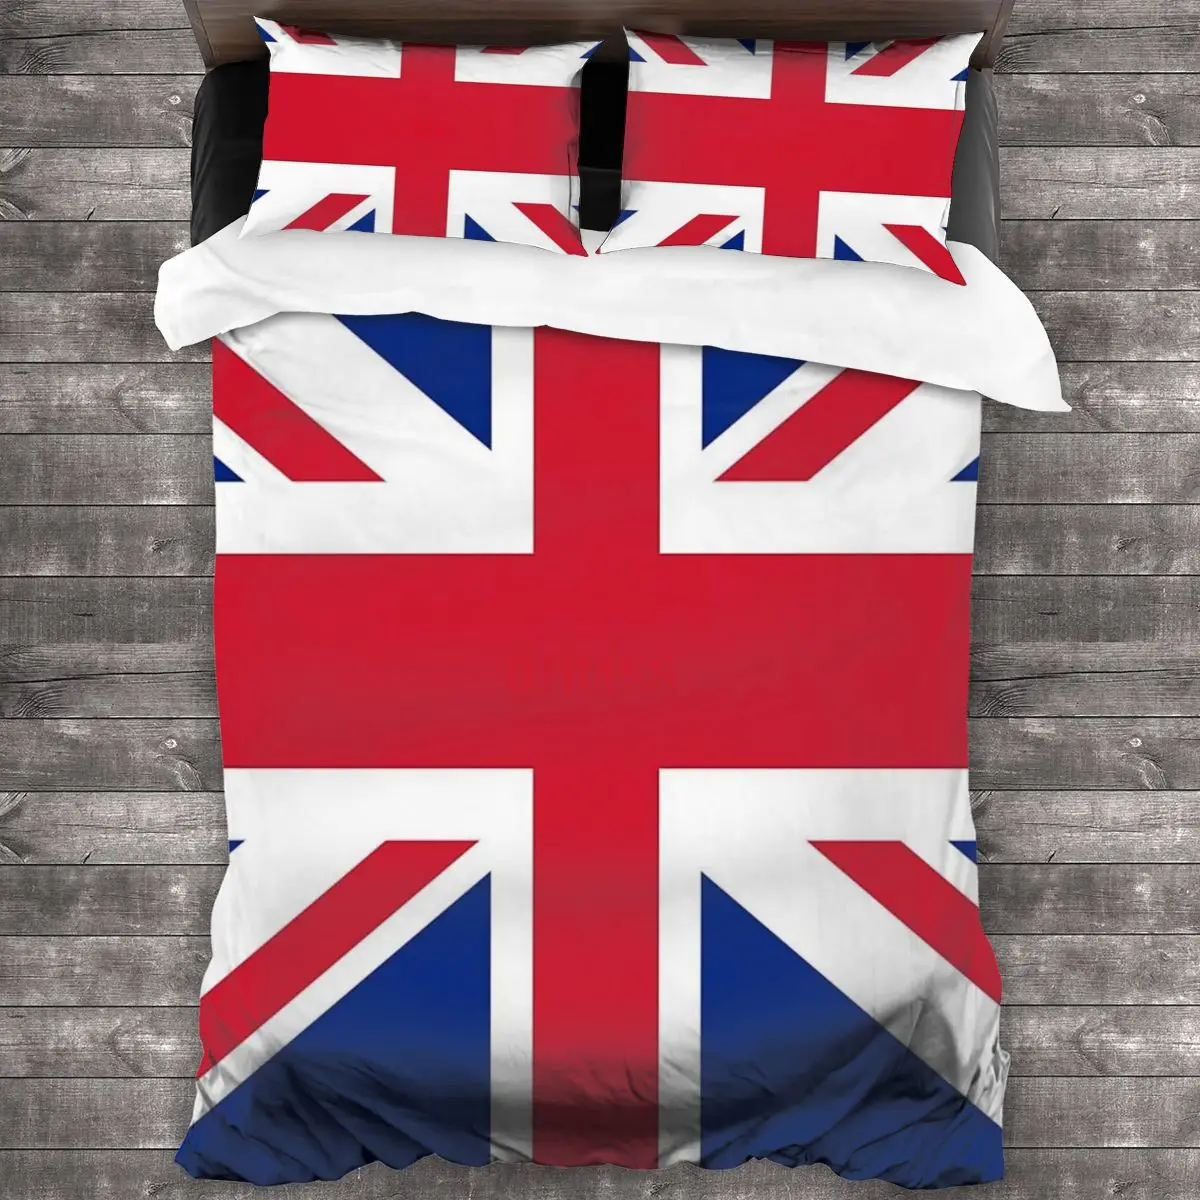 

Union Jack 1960s Mini Skirt British Flag Soft Microfiber Comforter Set with 2 Pillowcase Quilt Cover With Zipper Closure